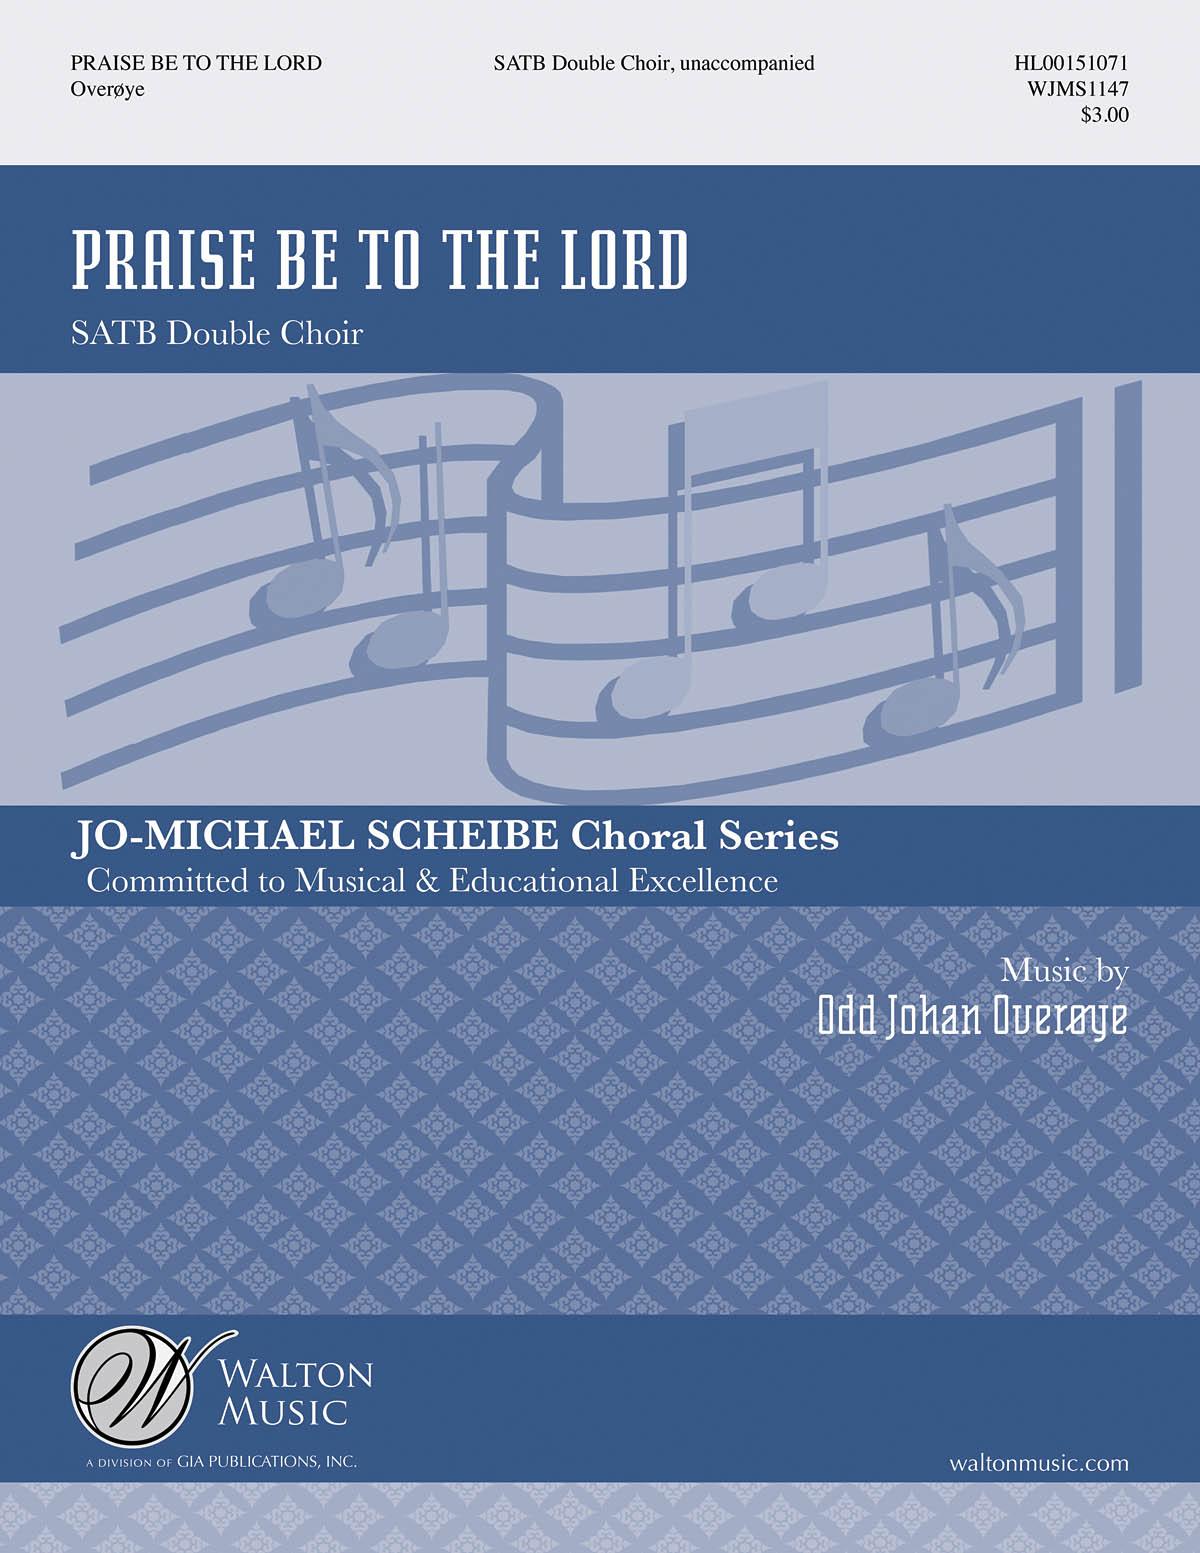 Odd Johan Overøye: Praise Be to the Lord: Mixed Choir a Cappella: Vocal Score